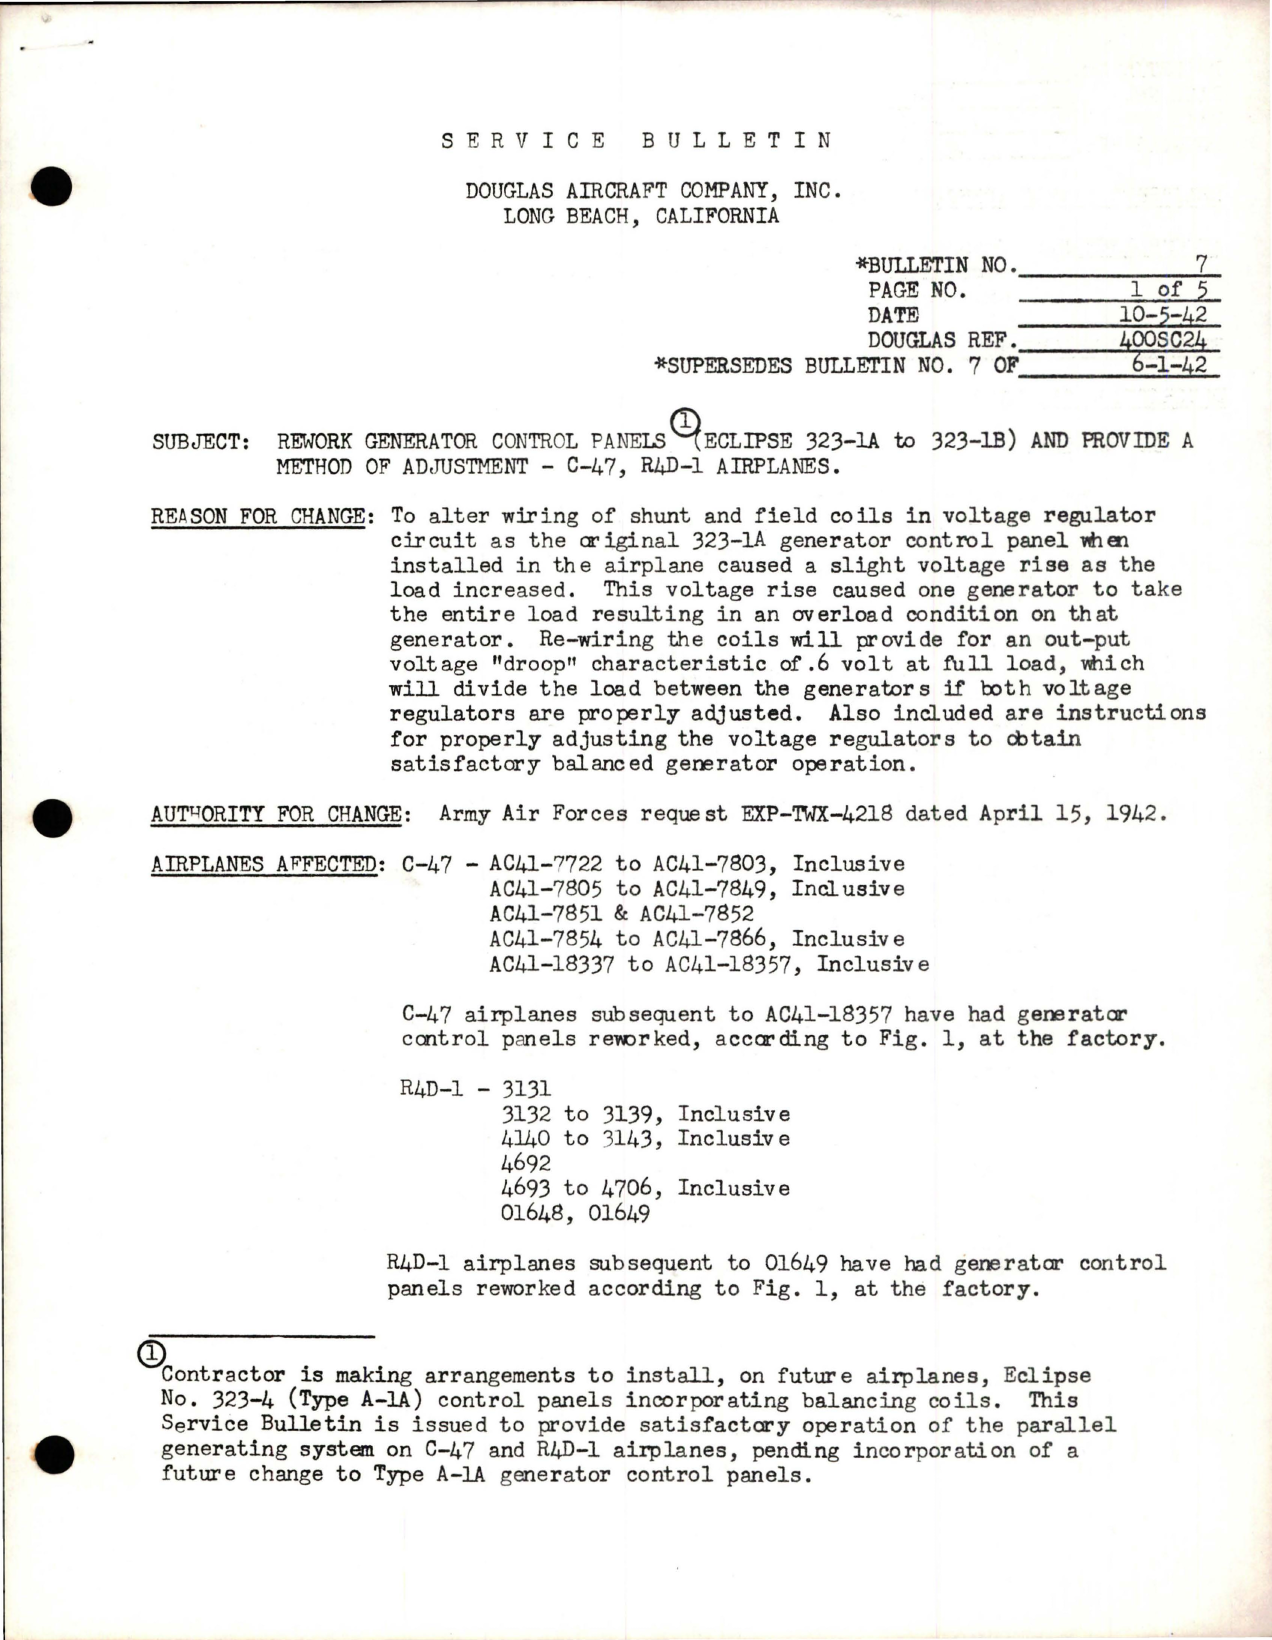 Sample page 1 from AirCorps Library document: Rework Generator Control Panels and Provide a Method of Adjustment - Eclipse 323-1A to 323-1B